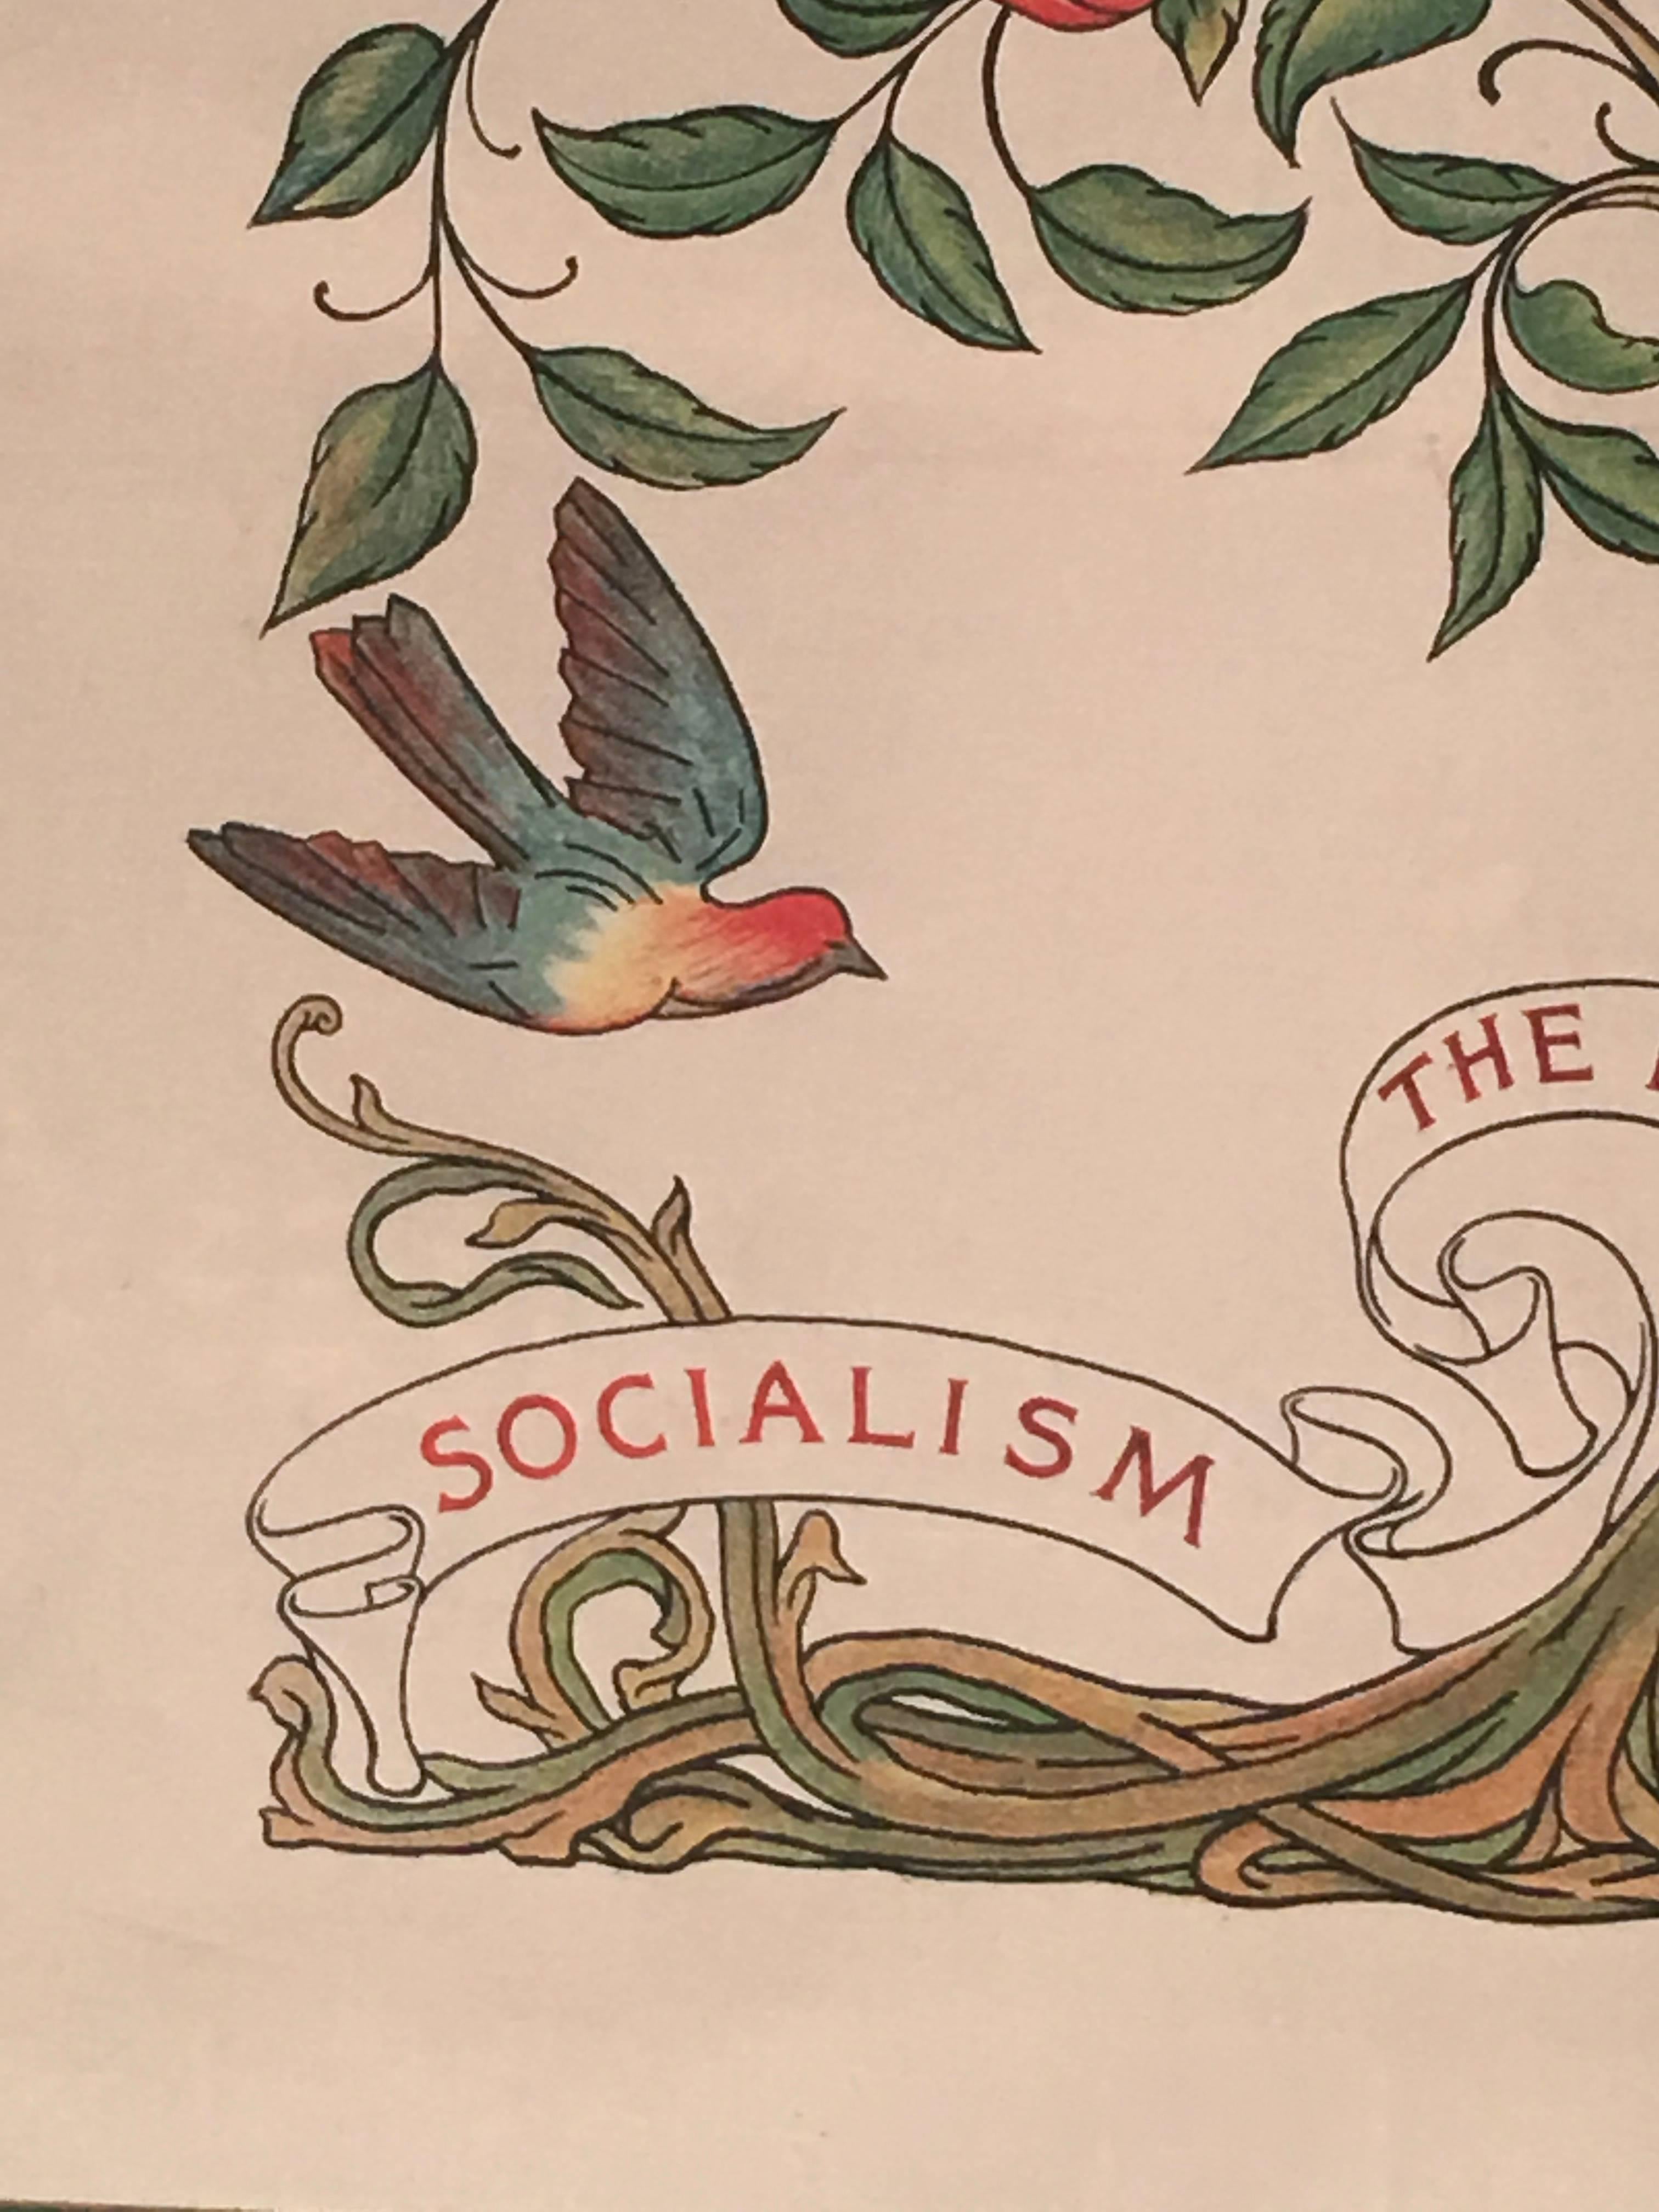 Arts and Crafts Socialism is the Hope of the World Banner, English. circa 1890